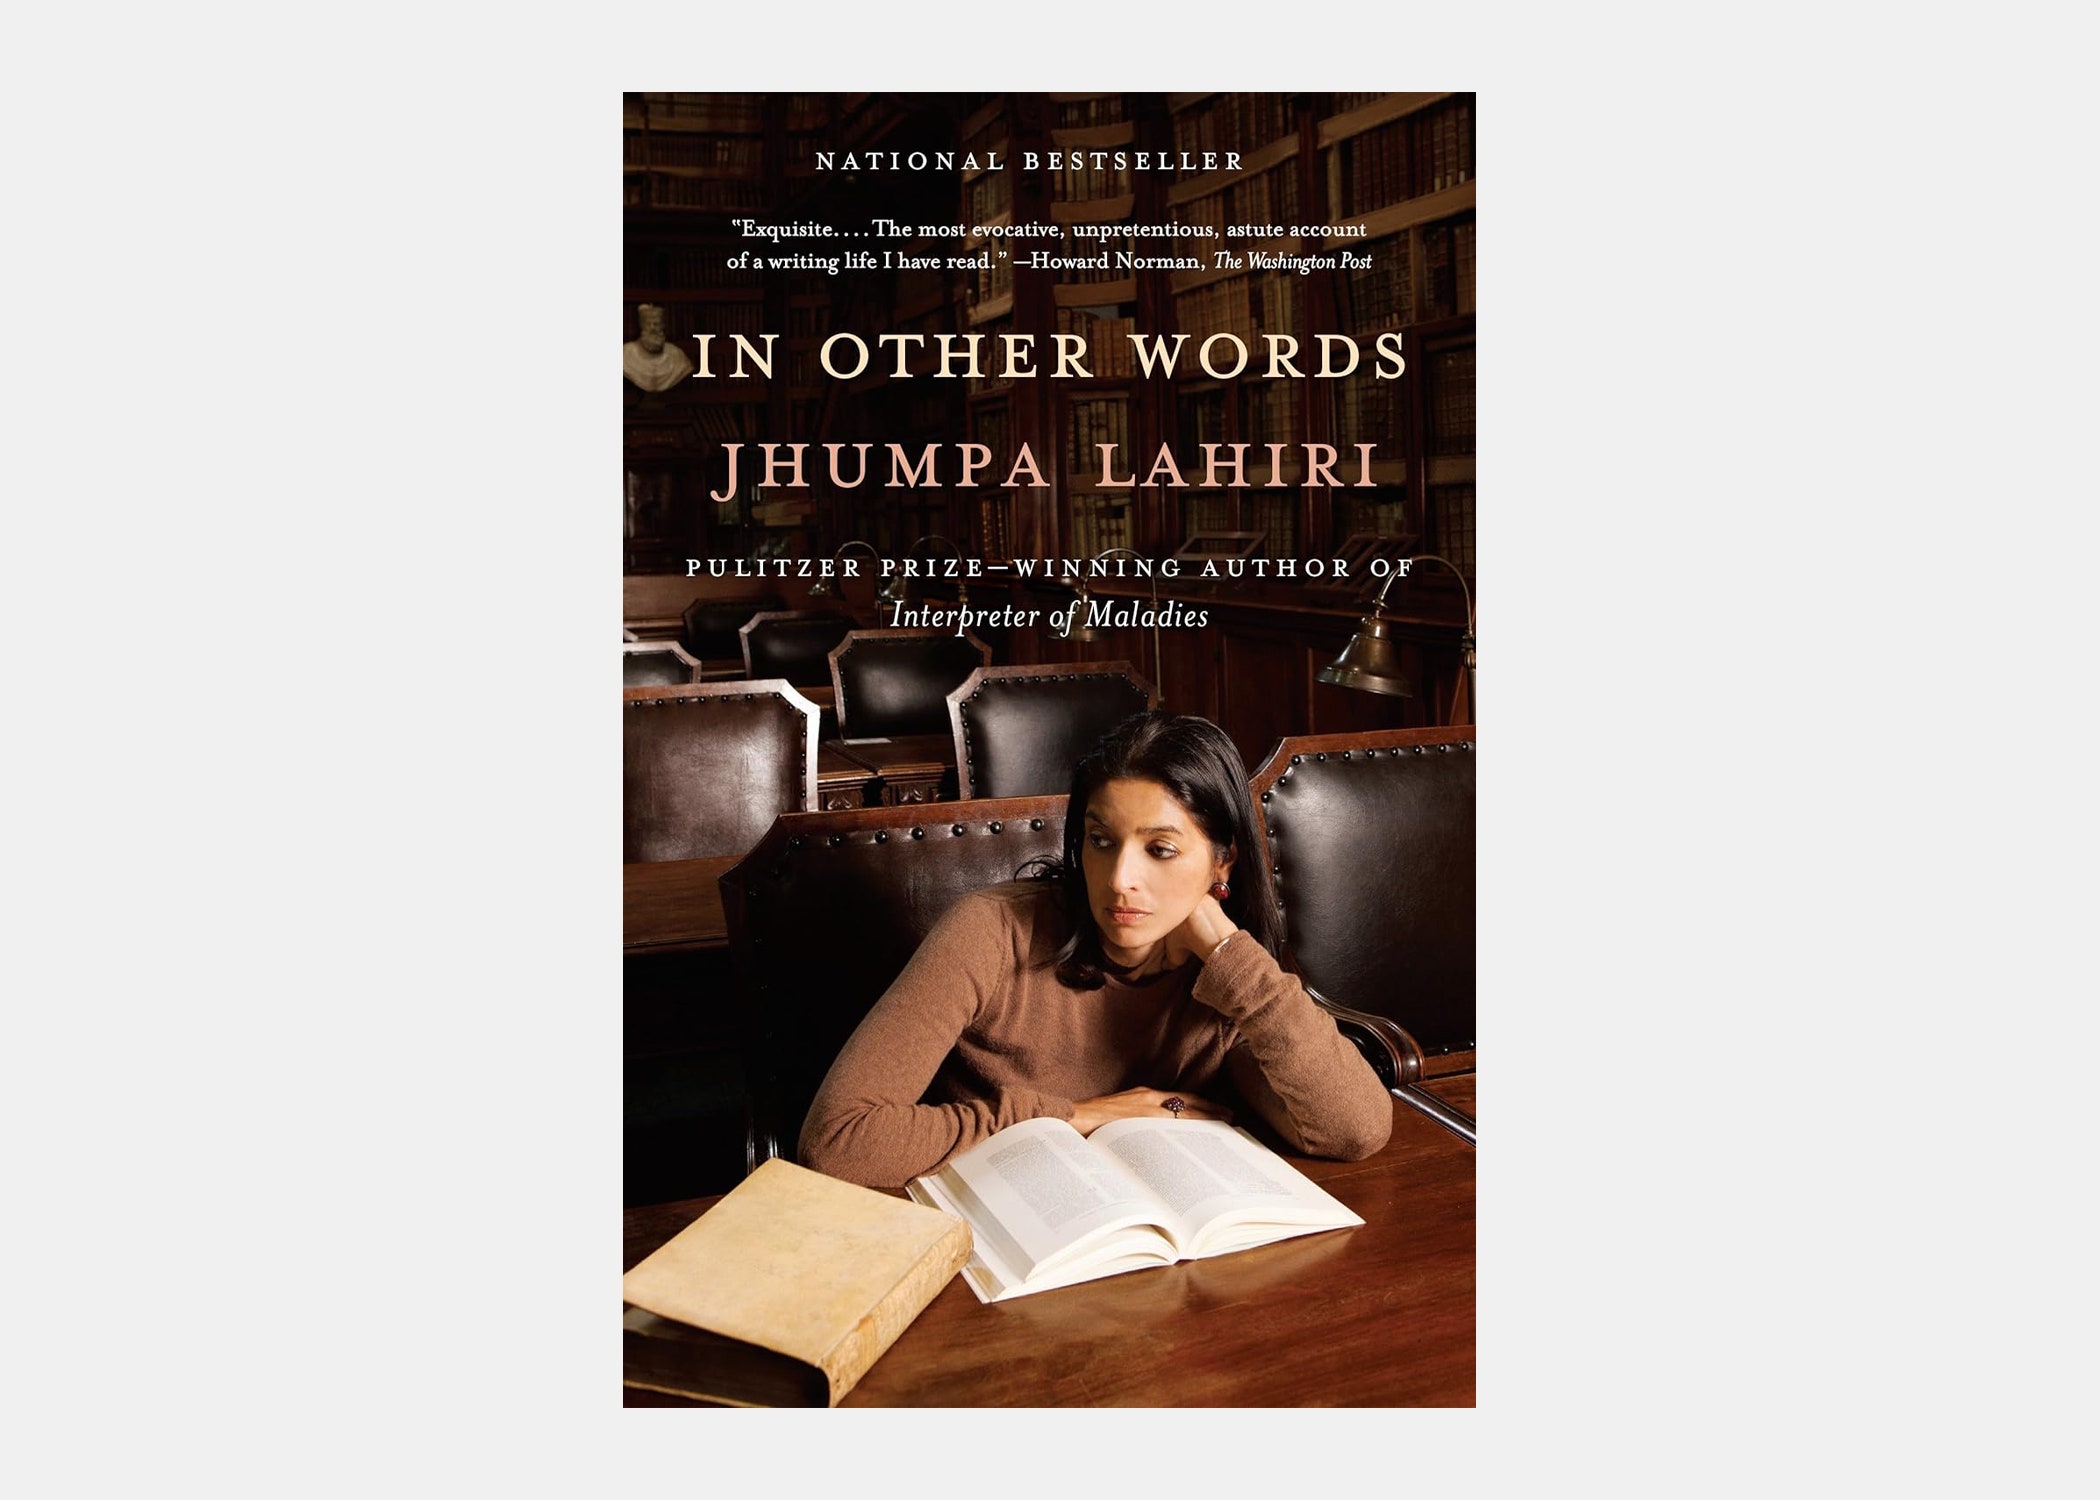 <p><strong>What it’s about:</strong> On its surface, Jhumpa Lahiri’s <em>In Other Words</em> is a series of short essays and reflections about the task of learning Italian. But once you crack open this elegant volume, you’ll see it’s so much more: Lahiri first wrote the book in Italian (to all the better master the language), and the English translation was provided by Ann Goldstein (yes, who translates Ferrante as well); more unusual, both the Italian and the English stand side by side in the book, on opposite pages. Reading how Lahiri’s fluency and confidence with Italian flourishes alongside the evolving English translation is enough inspiration for anyone to at least pick up a tourist phrasebook for Italian. Dov’è la libreria?</p> <p><strong>The mood it’s giving:</strong> Drinking in the mystique and genius of your most brilliant friend from your first year of college whom you met in that Italian 101 class</p> <p><strong>The book’s first sentence:</strong> “Voglio attraversare un piccolo lago. È veramente piccolo, eppure l’altra sponda mi sembra troppo distante, oltre le mie capacità. | I want to cross a small lake. It really is small, and yet the other shore seems too far away, beyond my abilities.”</p> $15, Amazon. <a href="https://www.amazon.com/Other-Words-Jhumpa-Lahiri/dp/1101911468/ref=sr_1_1?">Get it now!</a><p>Sign up to receive the latest news, expert tips, and inspiration on all things travel</p><a href="https://www.cntraveler.com/newsletter/the-daily?sourceCode=msnsend">Inspire Me</a>